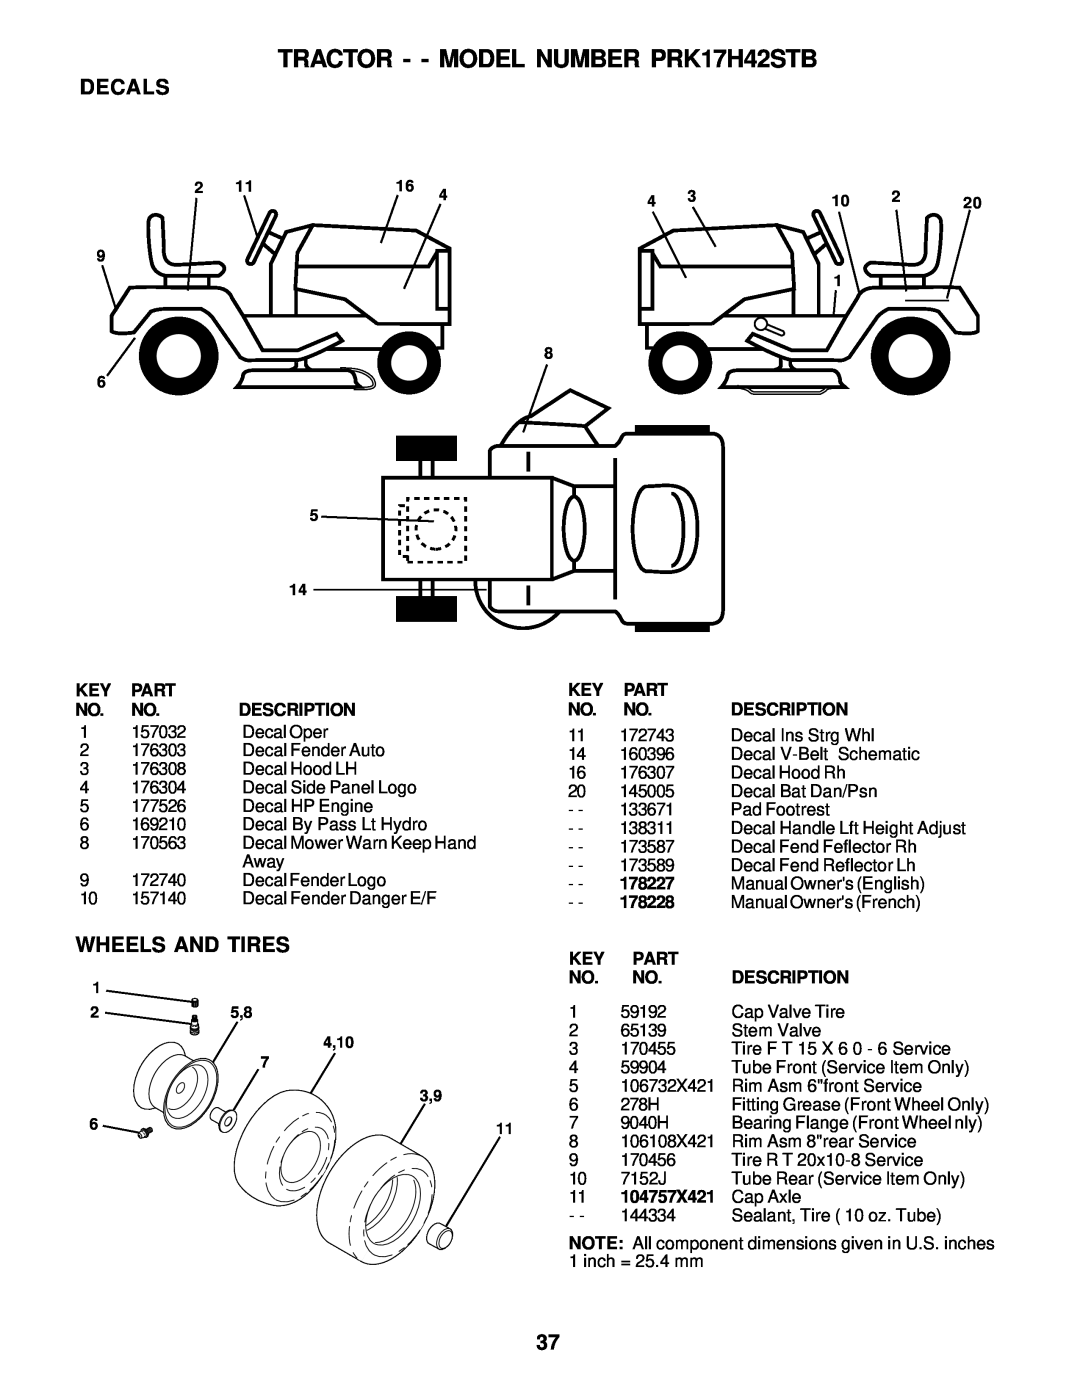 Poulan owner manual Decals, Wheels And Tires, TRACTOR - - MODEL NUMBER PRK17H42STB 